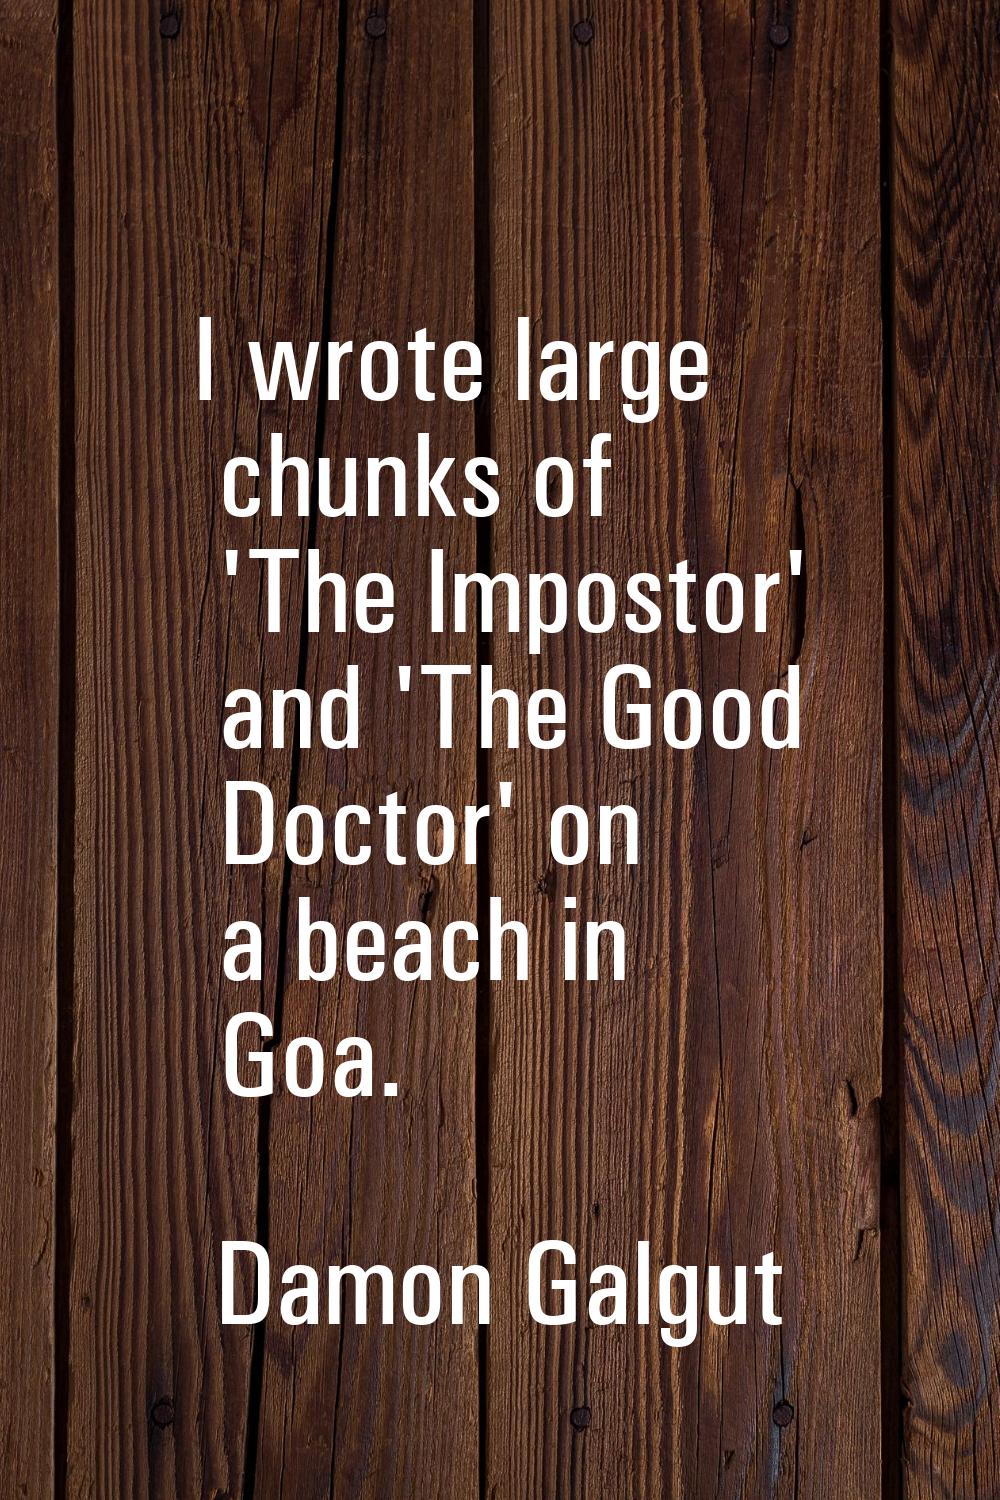 I wrote large chunks of 'The Impostor' and 'The Good Doctor' on a beach in Goa.